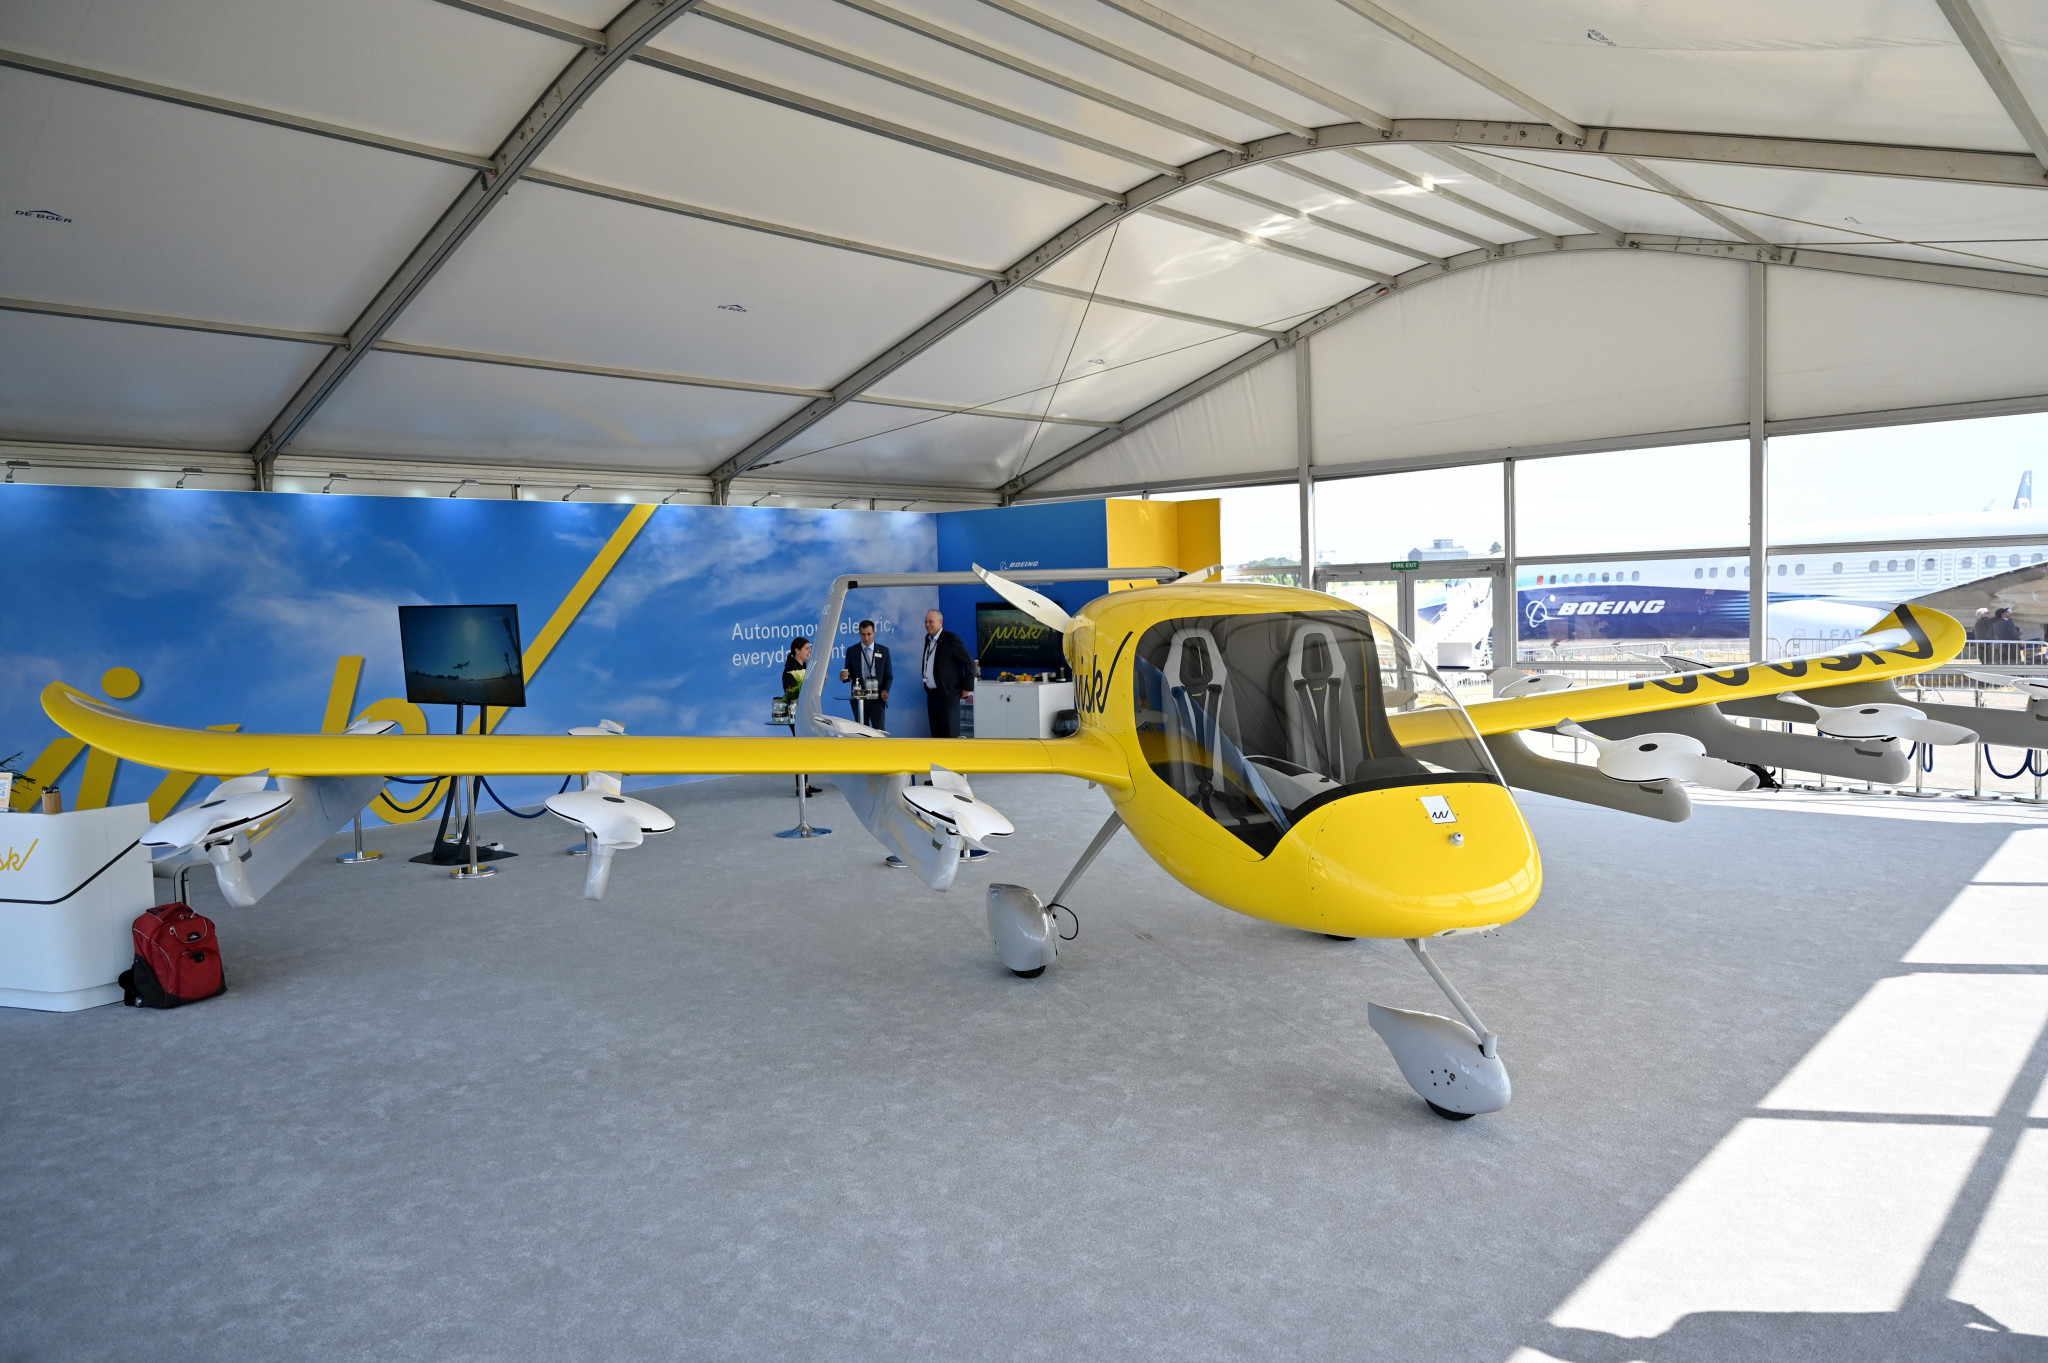 Wisk Aero aims for its two-seater self-flying air taxis to operate with an on-demand system like Uber in the future ©Getty Images